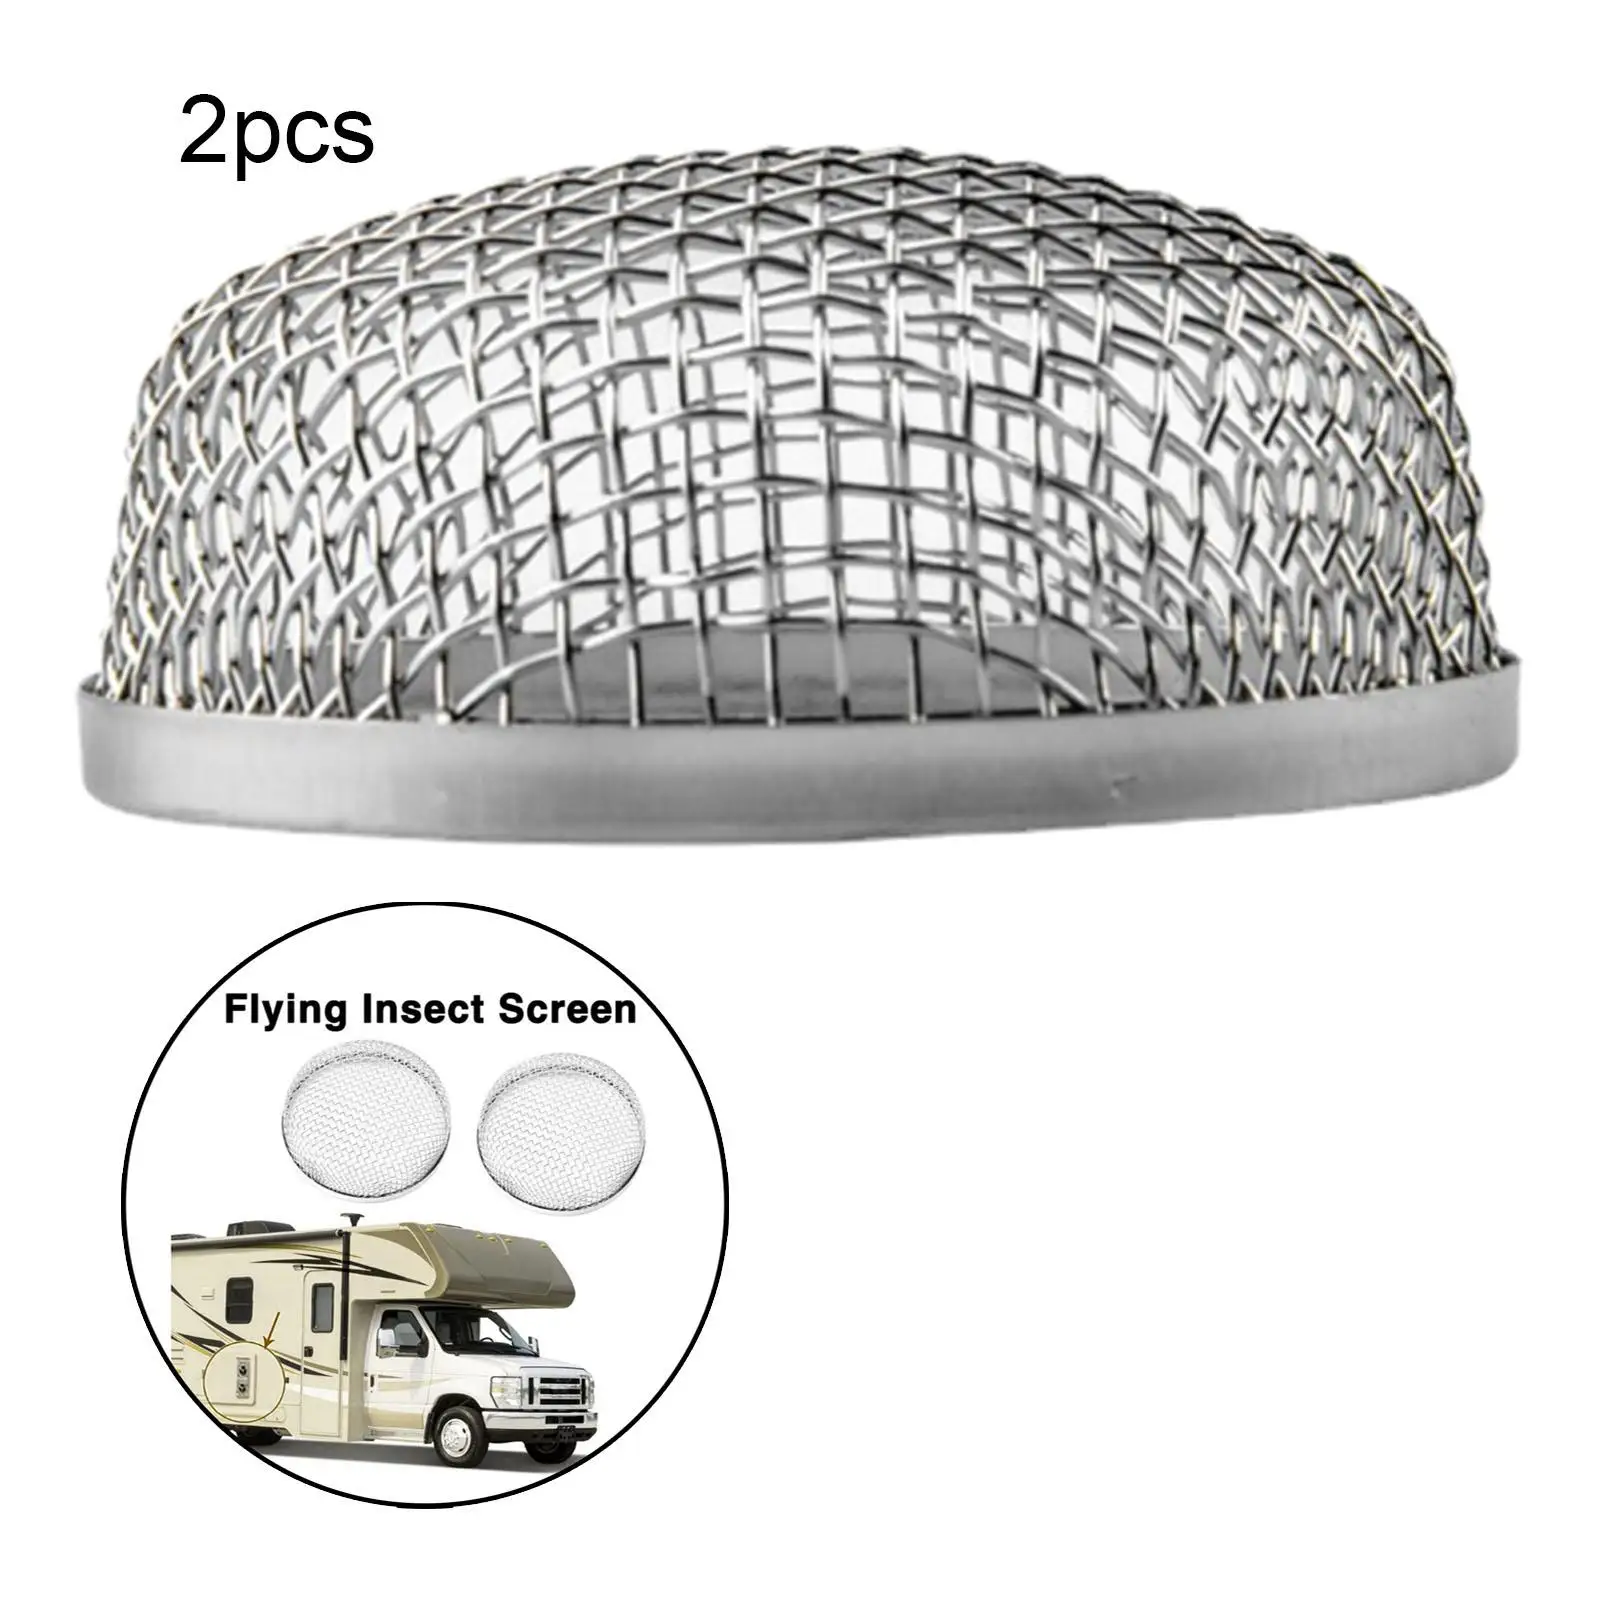 2 Pieces RV Flying Insect Screen Flying Insect cover 2.8